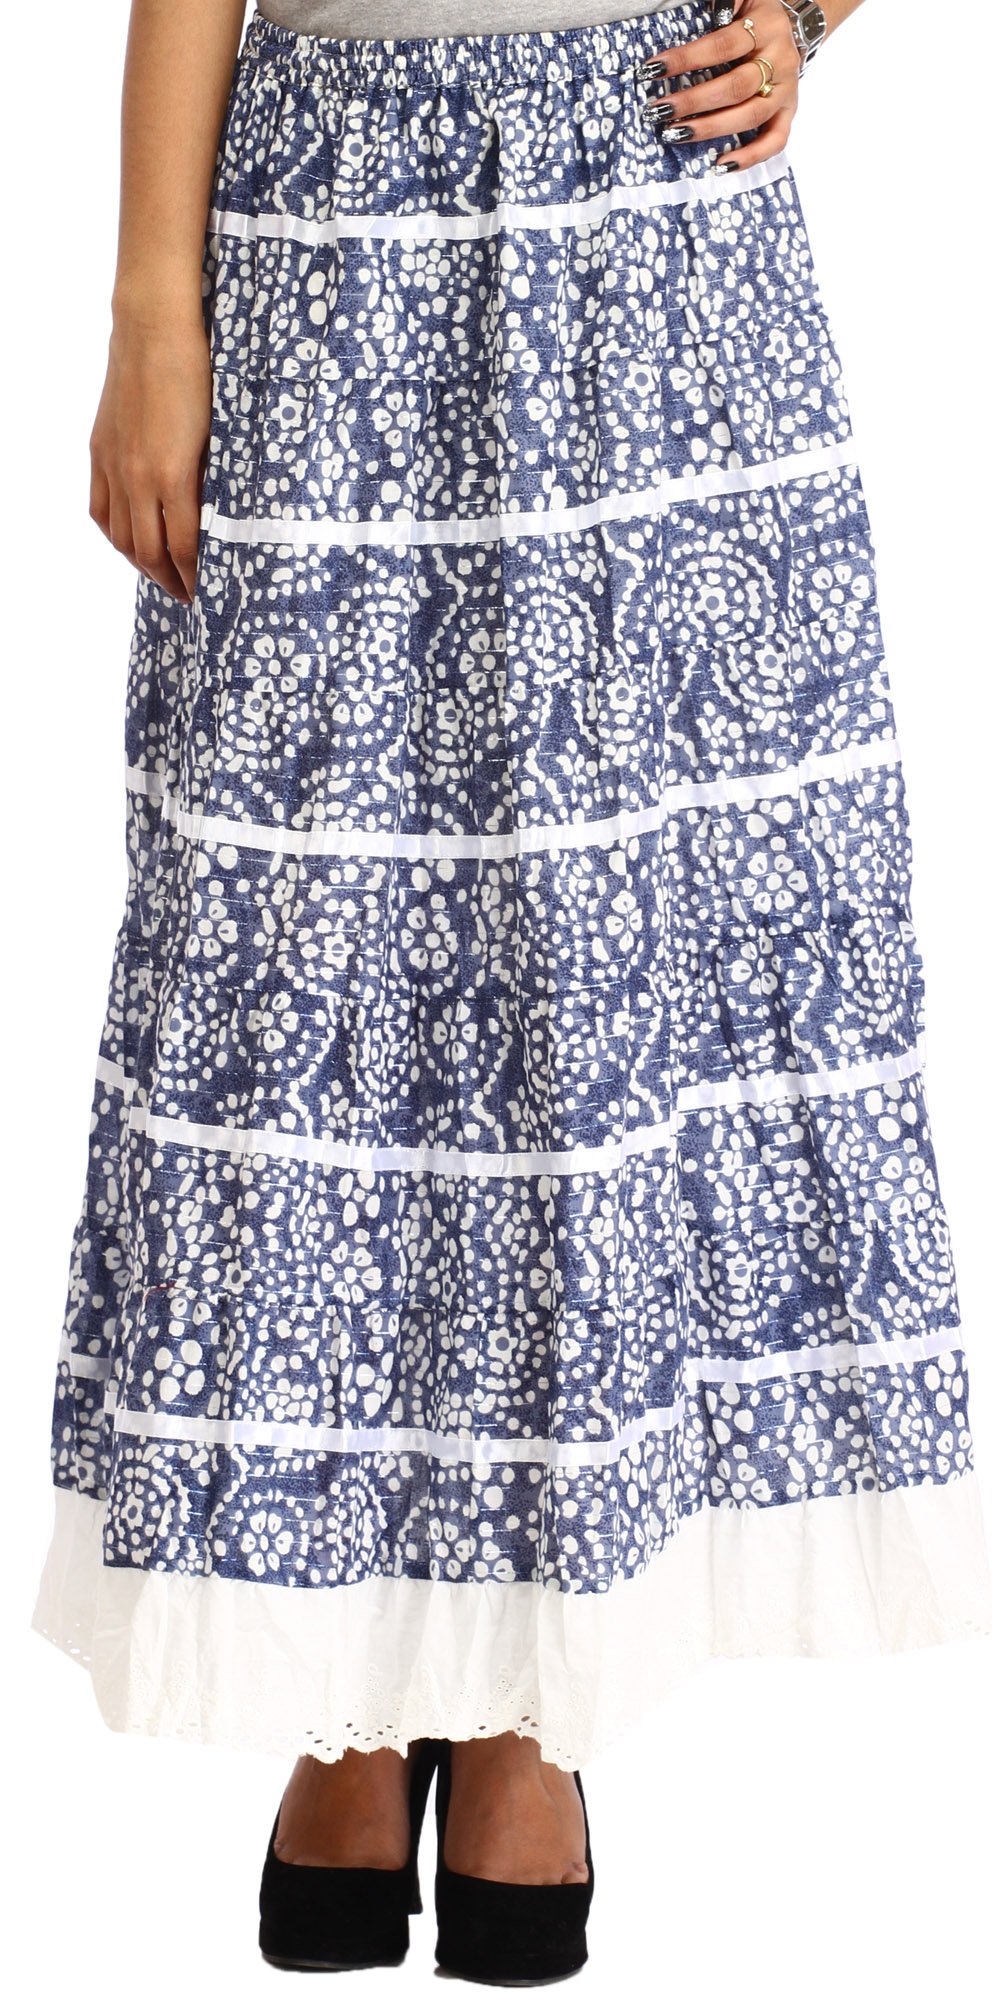 Moonlight-Blue Long Elastic Skirt with Floral Print and Cut-work on ...